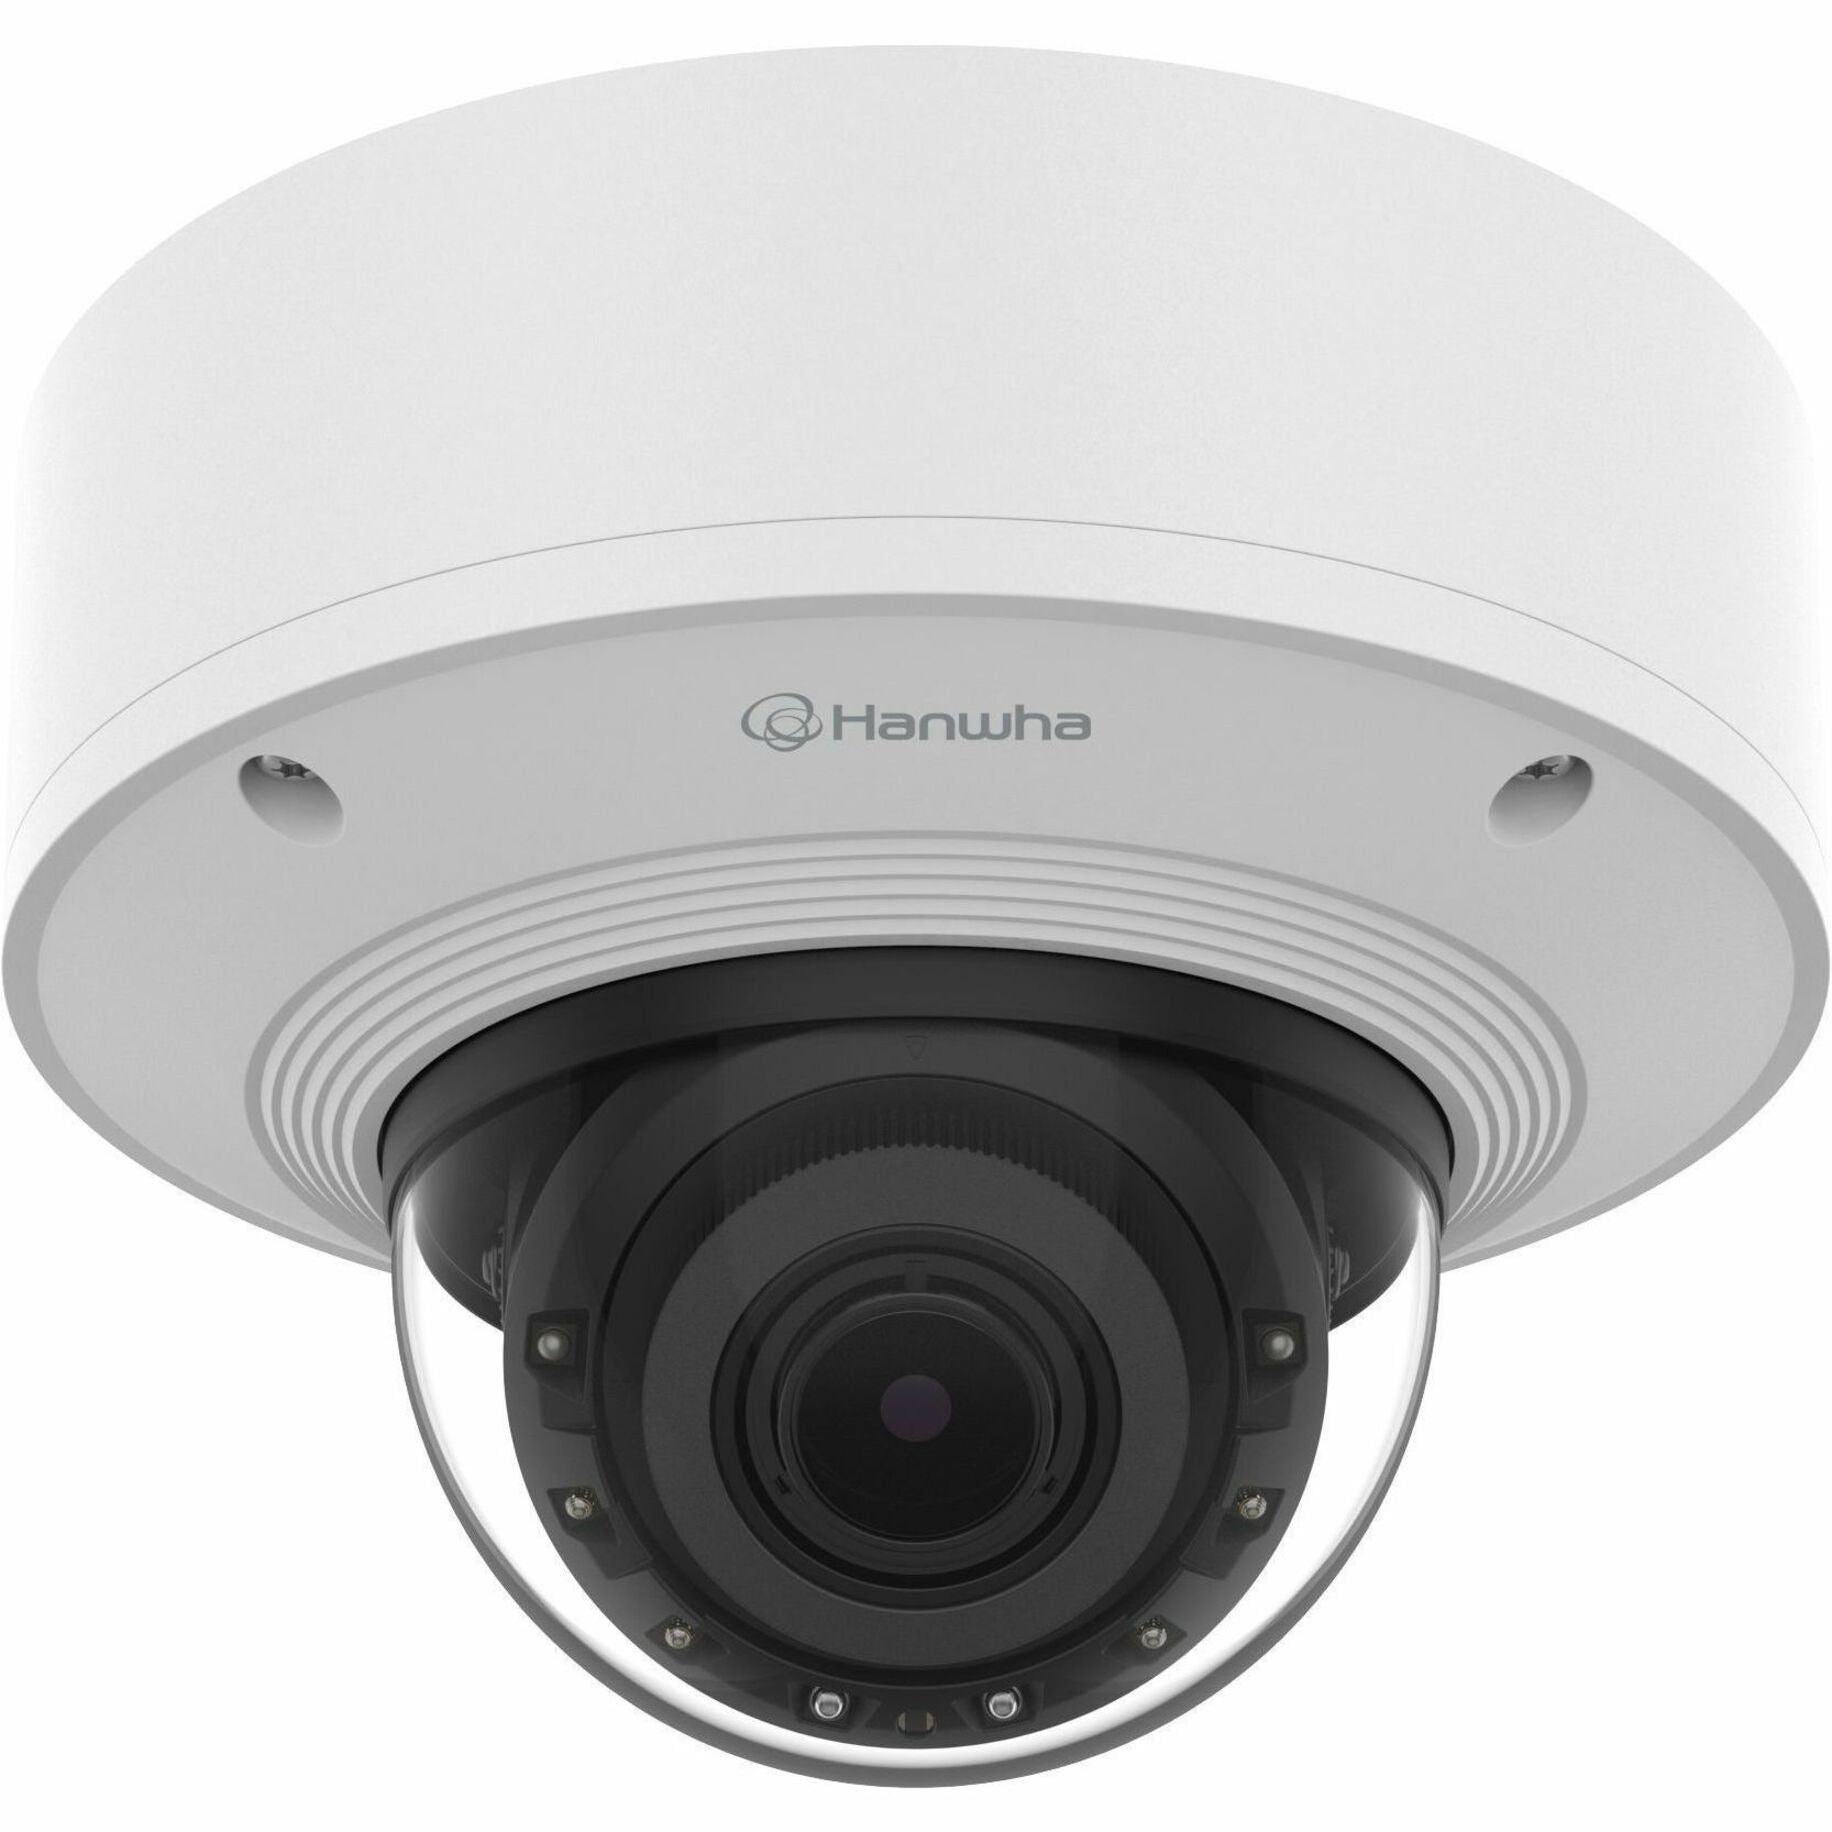 Hanwha PNV-A6081R-E2T 2MP Camera with built-in 2TB Rugged SSD, Varifocal Lens, H.265 Video Format, 120 fps, 1920 x 1080 Resolution